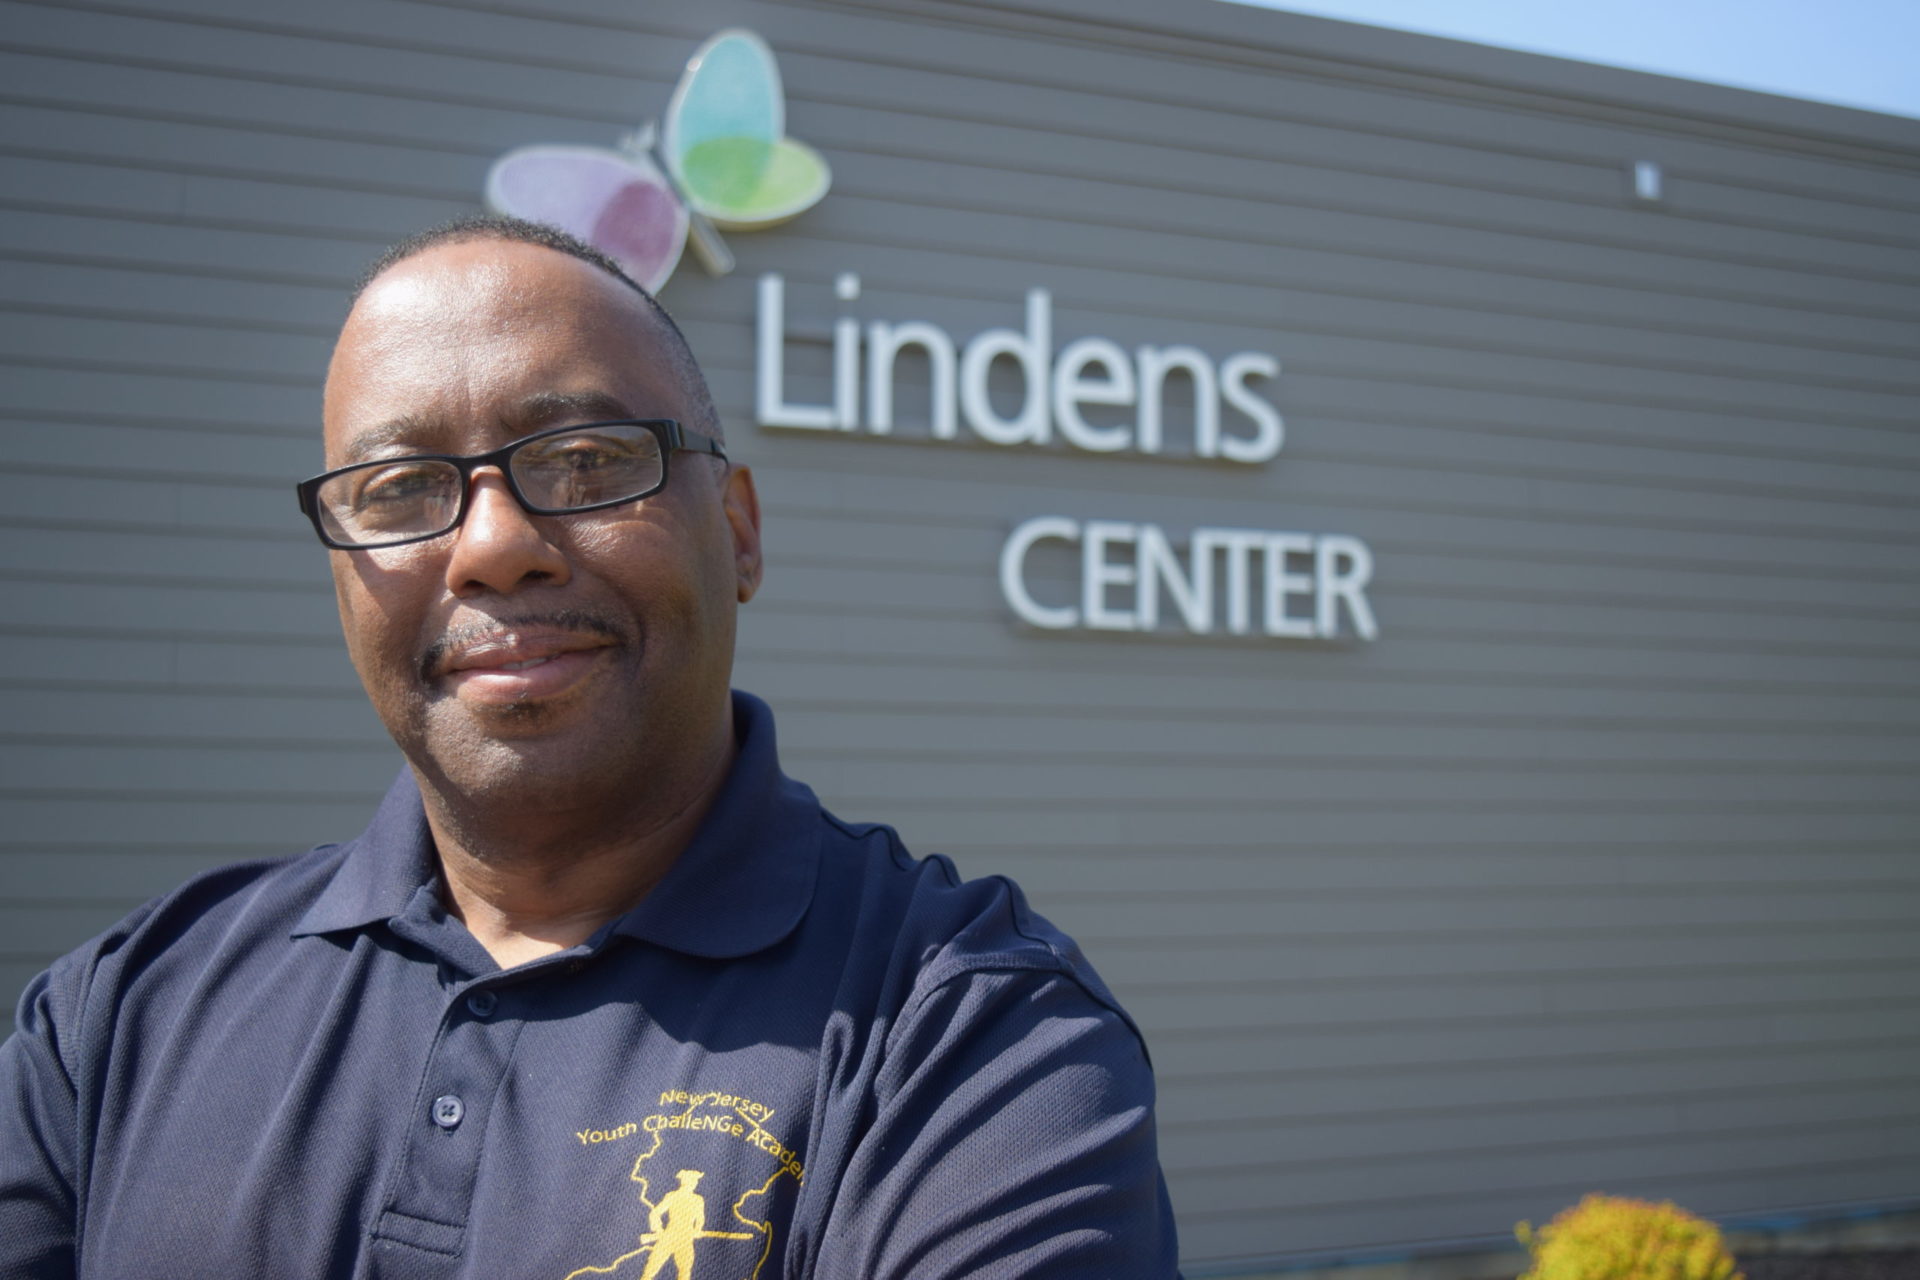 Michael Bradley, a dark-skinned man in a blue polo, stands outside of the Lindens Center building and smiles